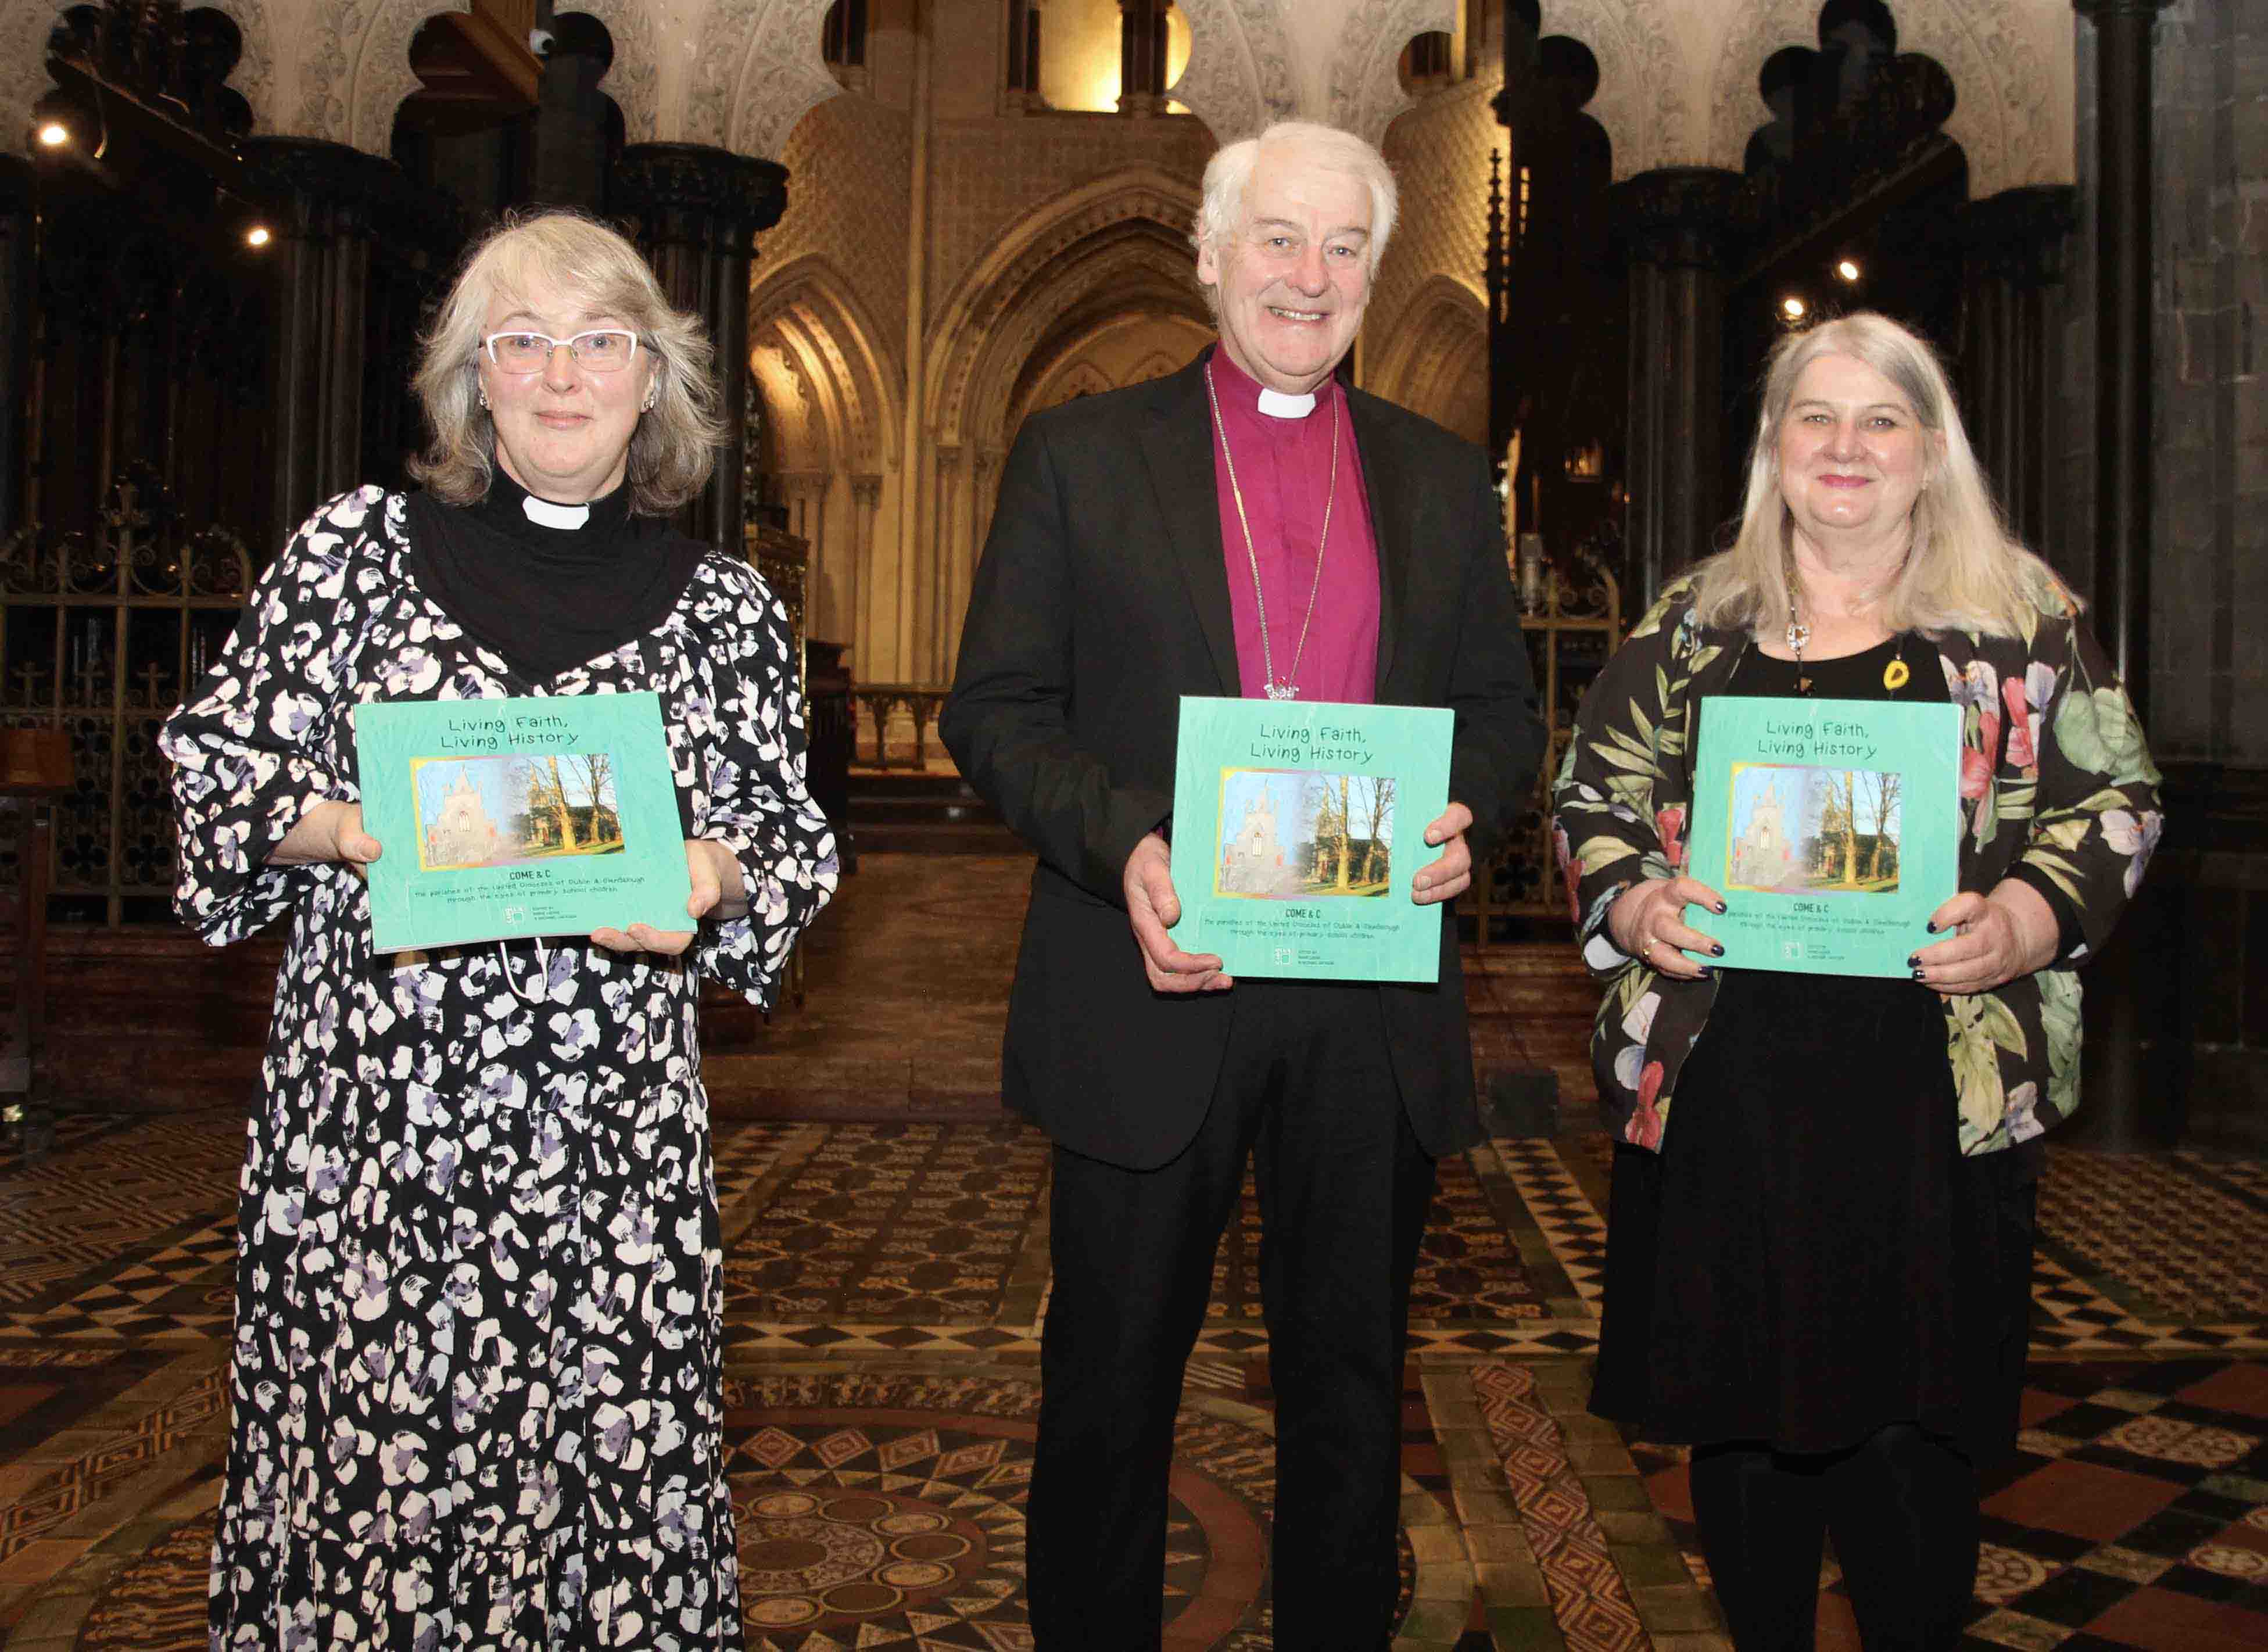 The Revd Prof Anne Lodge, Archbishop Michael Jackson and Dr Ida Milne at the launch of 'Living Faith, Living History' in Christ Church Cathedral.